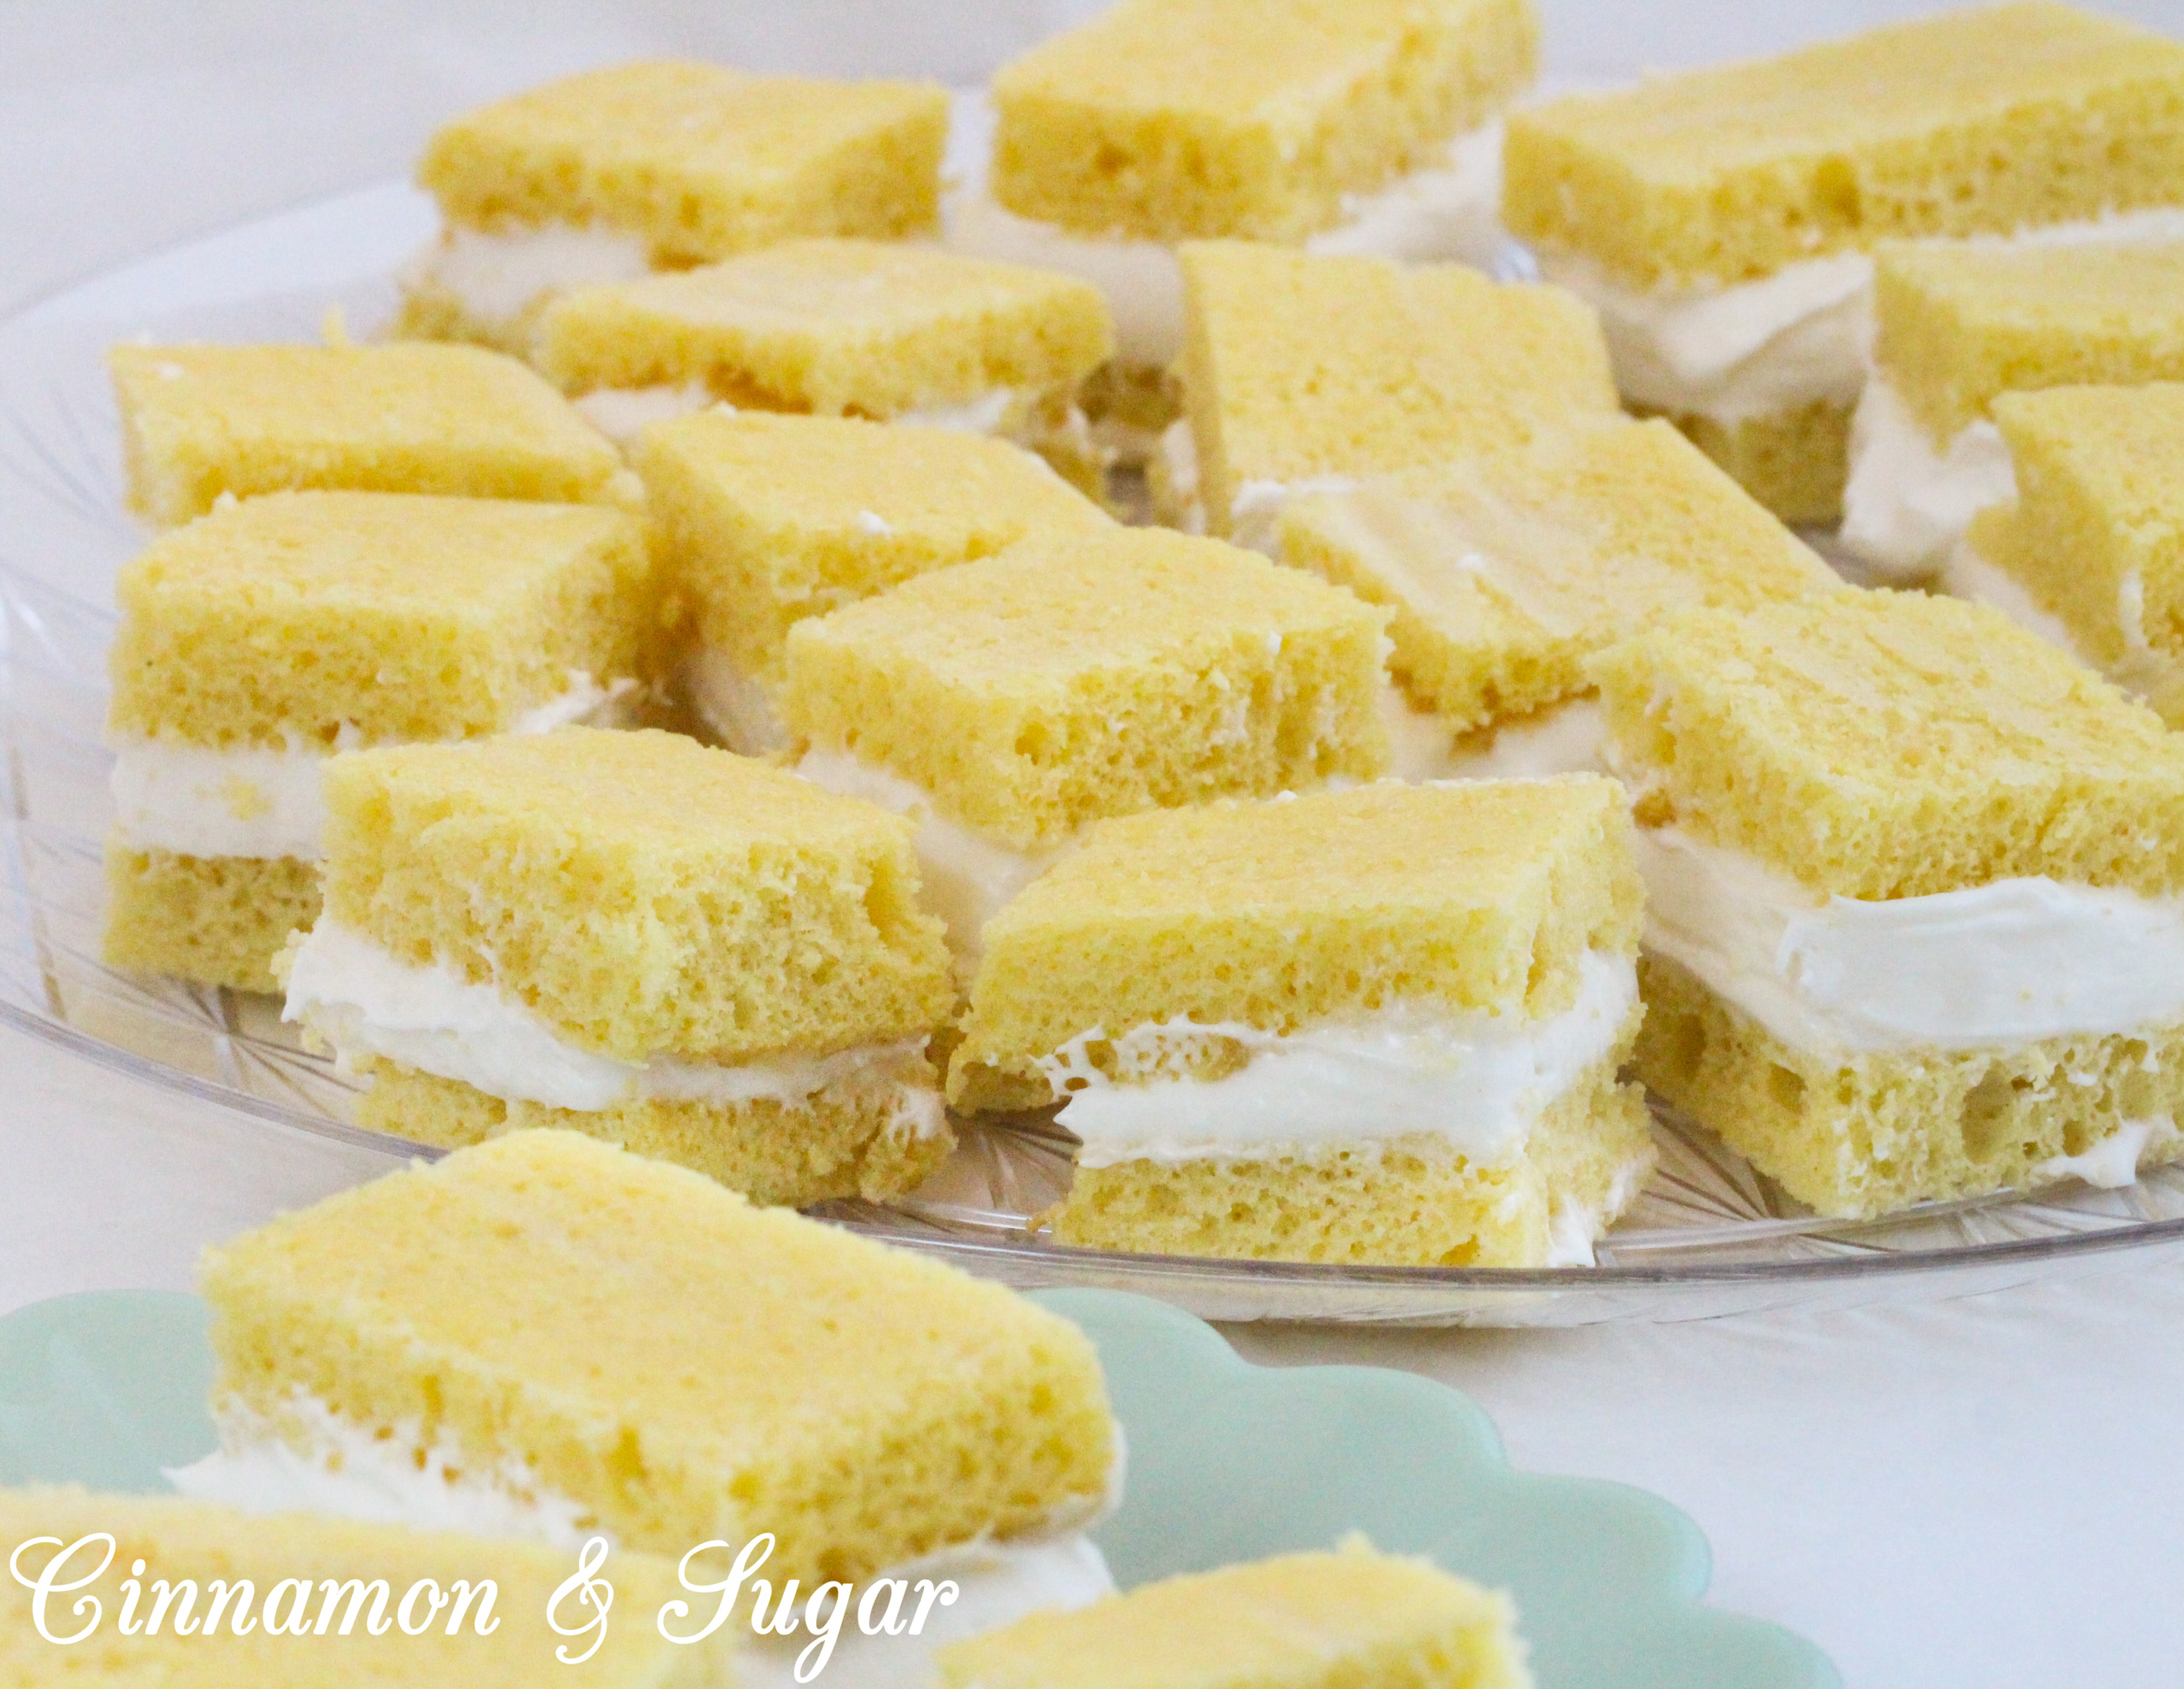 Using convenience products, these Twinkies are tender, golden cakes with a luscious creamy filling! The batch makes plenty to eat several pieces yourself and still have enough to share with family and friends! Recipe shared with permission granted by Kaye George, author of REVENGE IS SWEET.